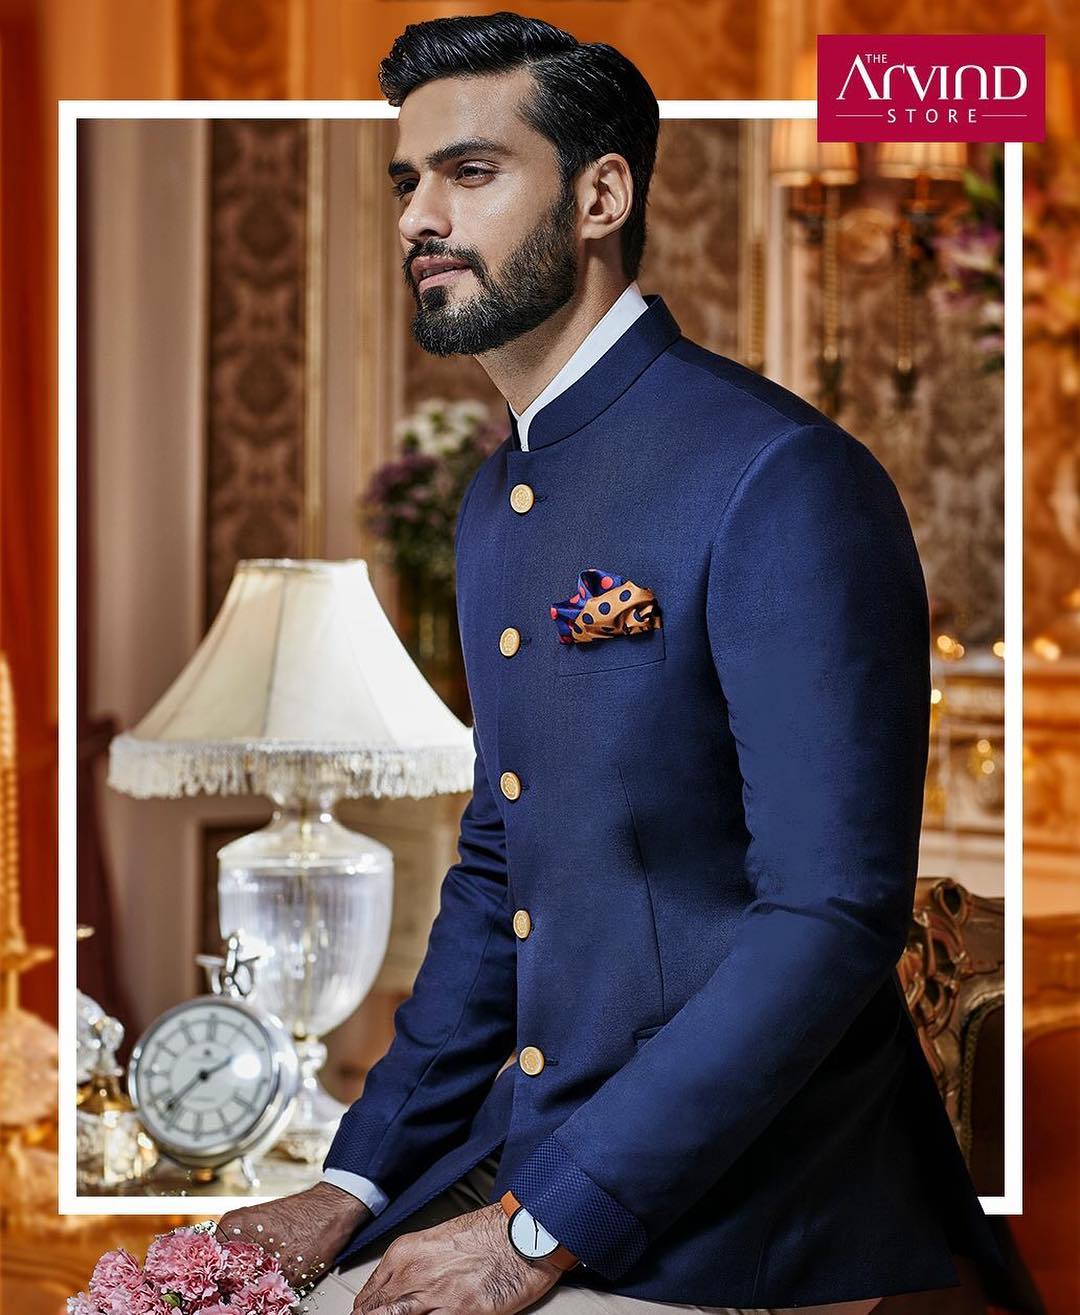 Celebrations get better when you choose the perfect attire. Come, explore the distinct navy blue bandhgala that befits the wedding festivities. Book an appointment at our nearest store - Link in Bio

#celebrationwear #weddingwear #suits #royal #weddingsuits #bestdressed #menswear #handcrafted #groomsuit #designersuits #exclusive